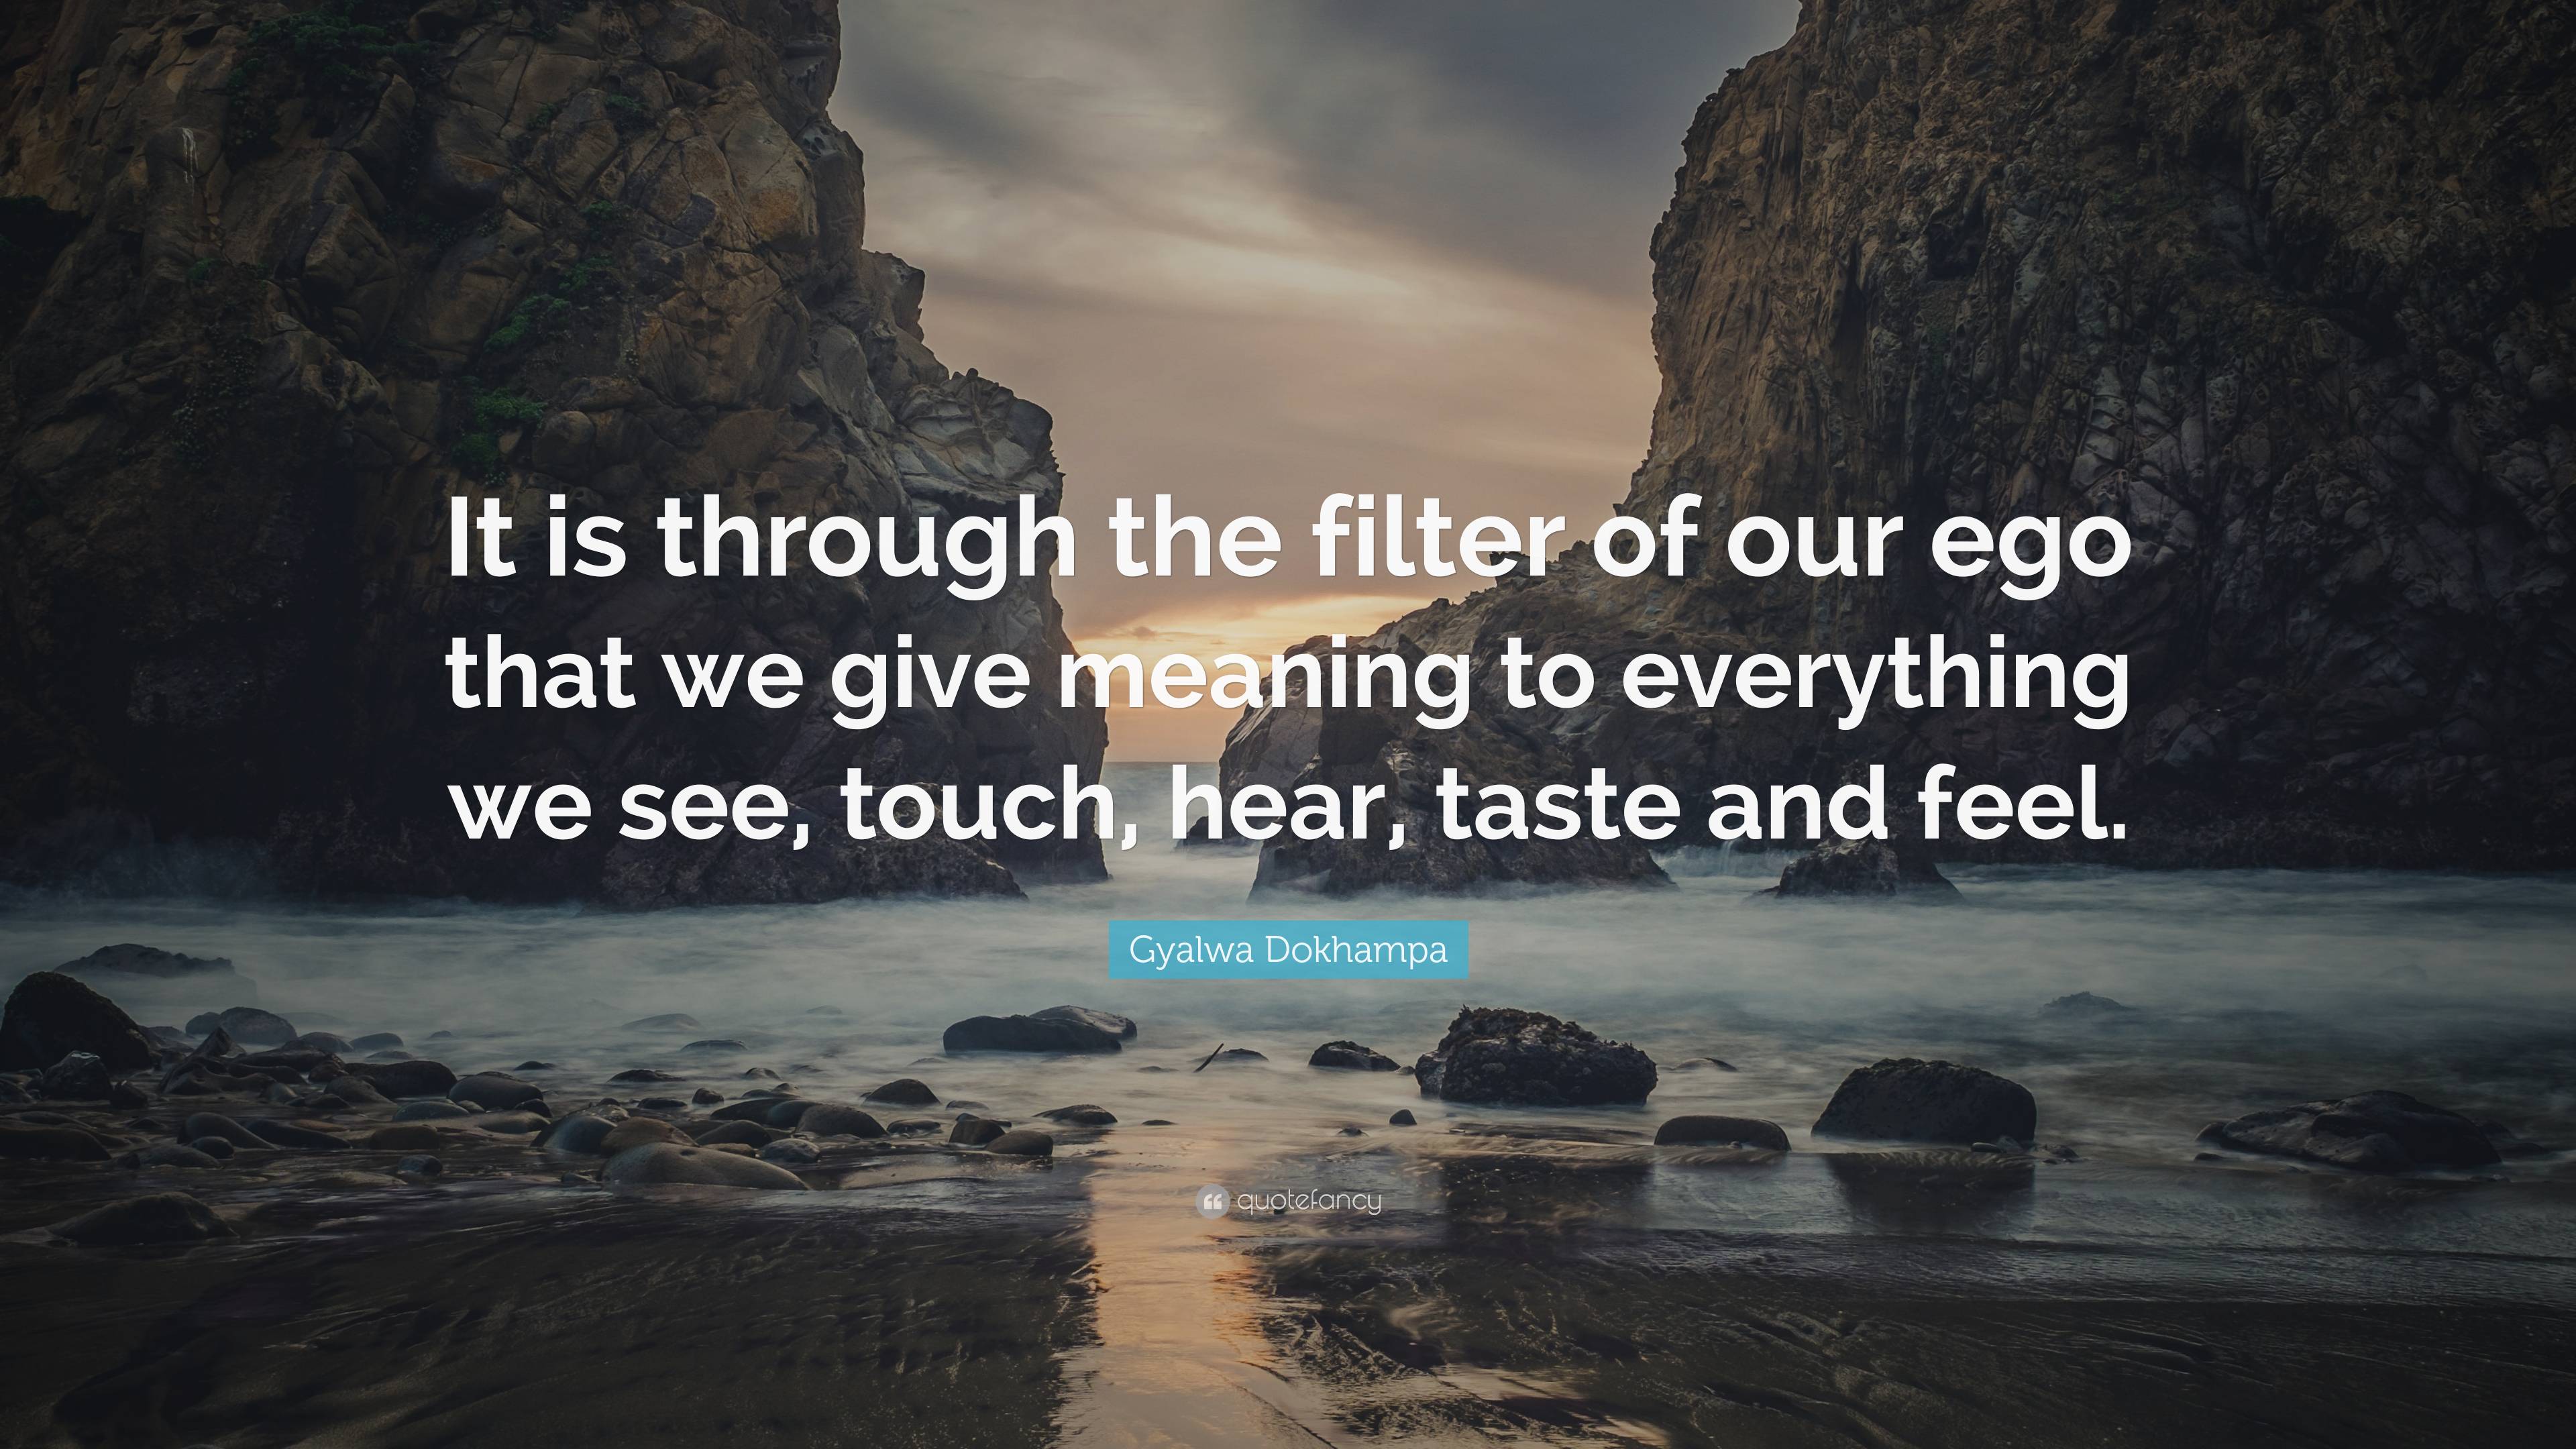 Gyalwa Dokhampa Quote: “It is through the filter of our ego that we give  meaning to